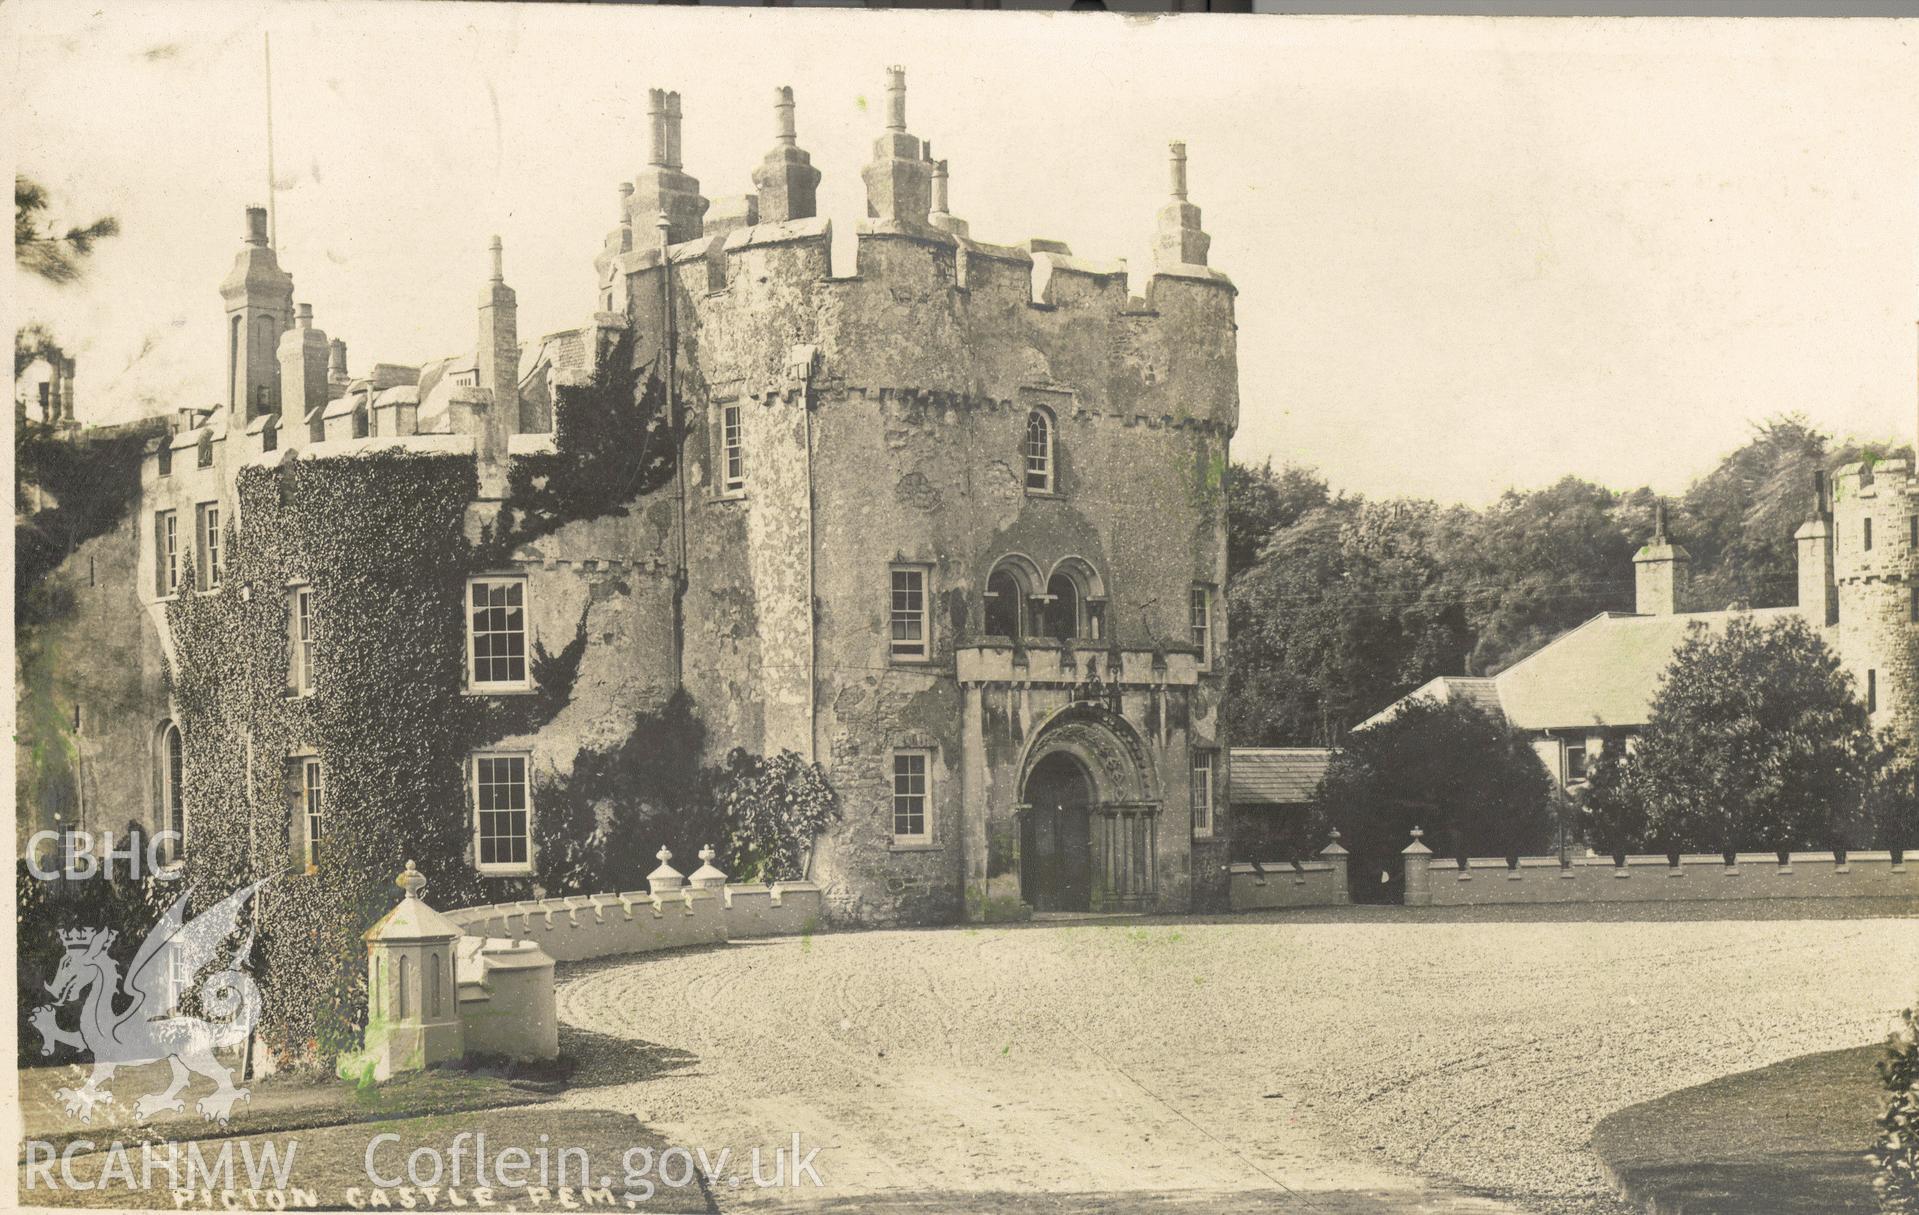 Digitised postcard image of Picton Castle, Slebech. Produced by Parks and Gardens Data Services, from an original item in the Peter Davis Collection at Parks and Gardens UK. We hold only web-resolution images of this collection, suitable for viewing on screen and for research purposes only. We do not hold the original images, or publication quality scans.